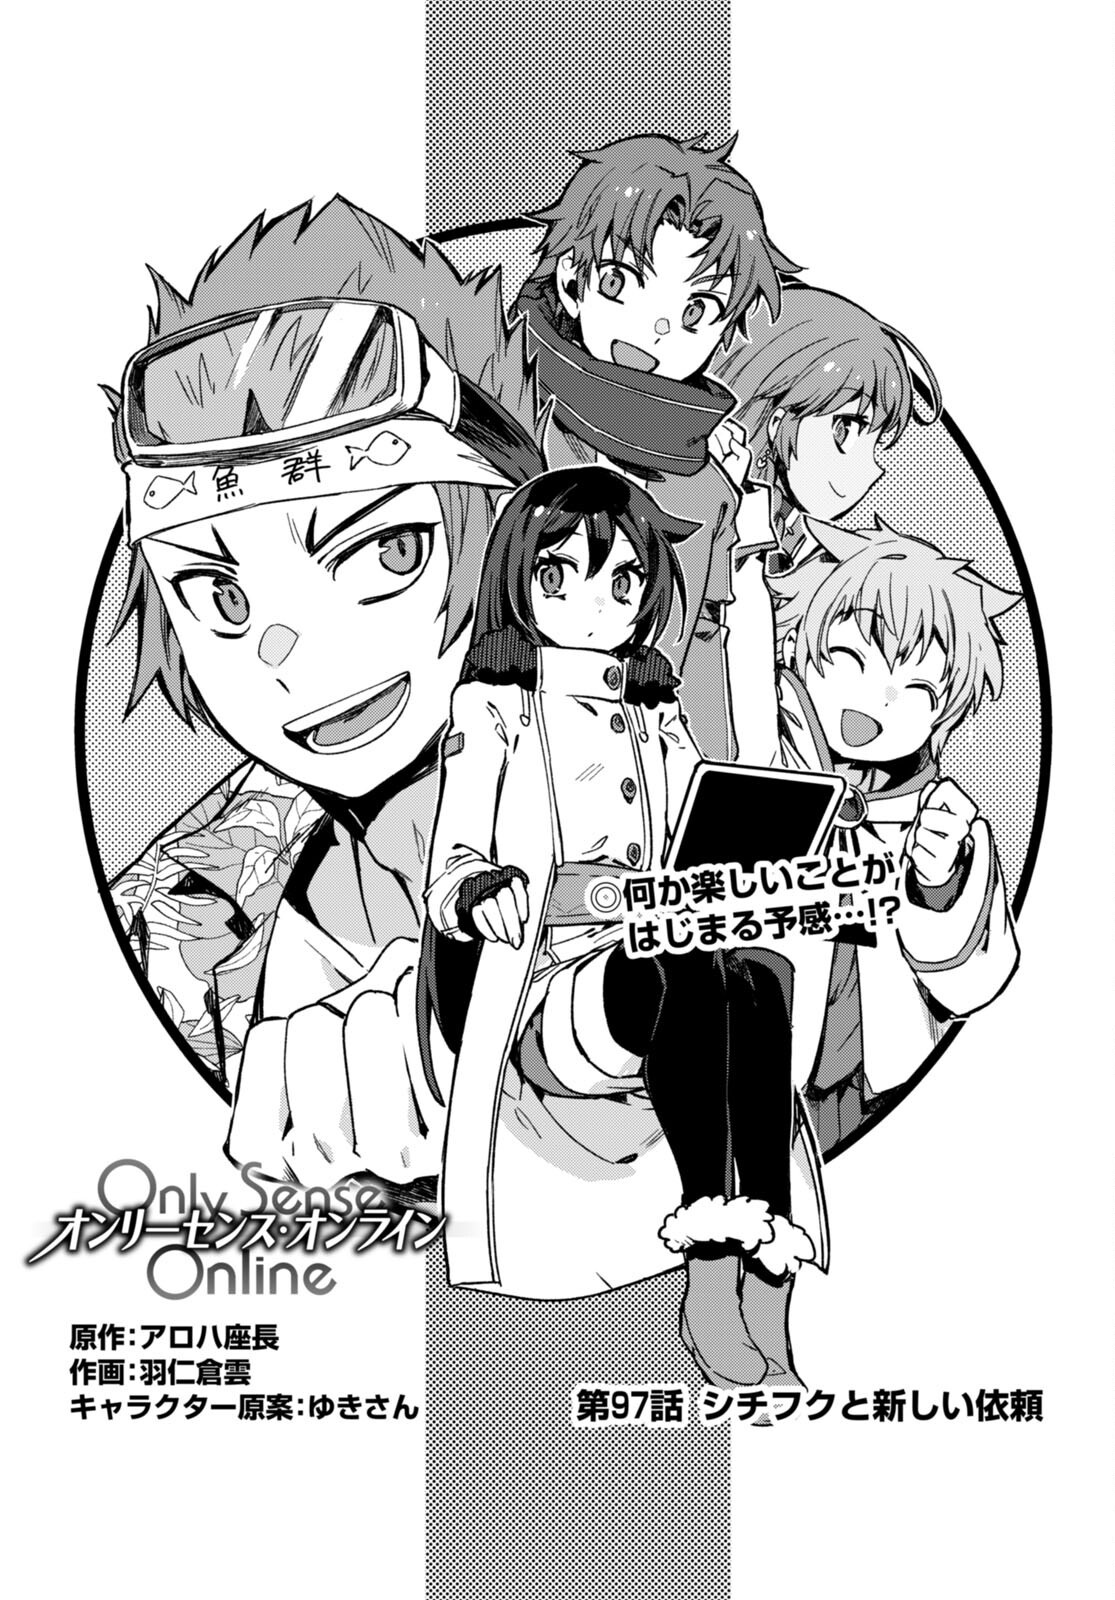 Only Sense Online Chapter 97